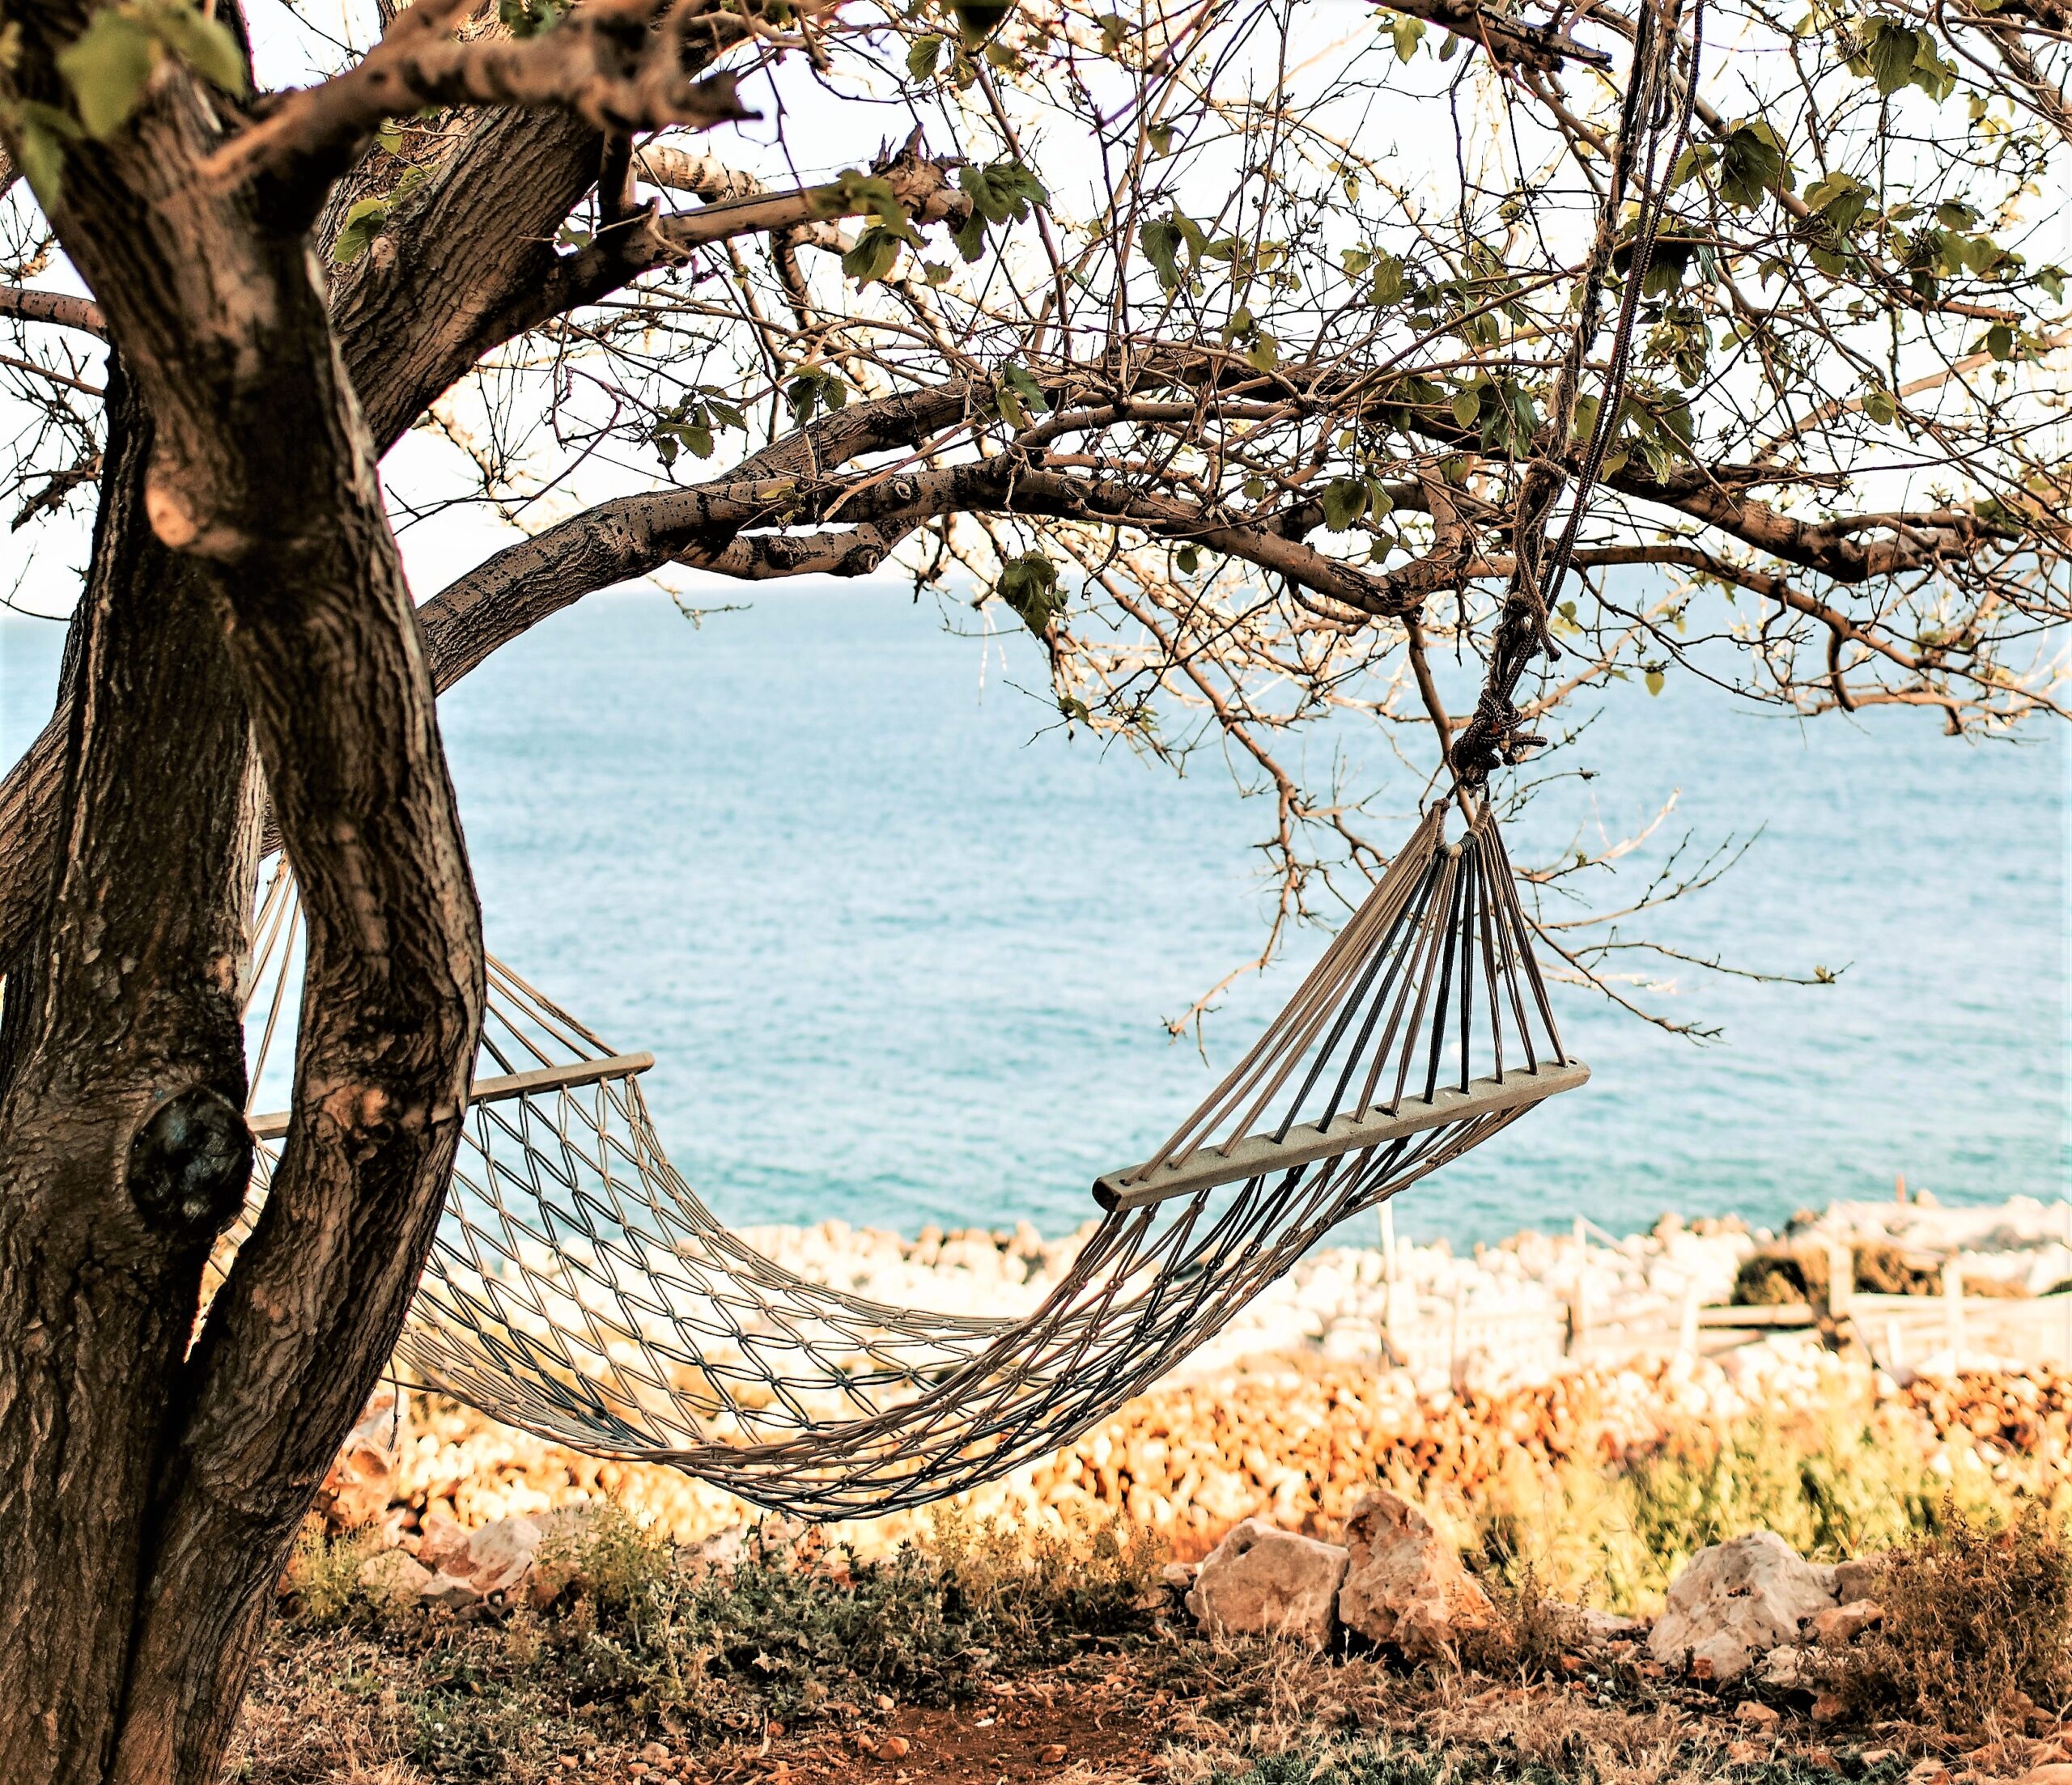 A hammock is gently swaying under an old tree on the shore with the ocean as a background.